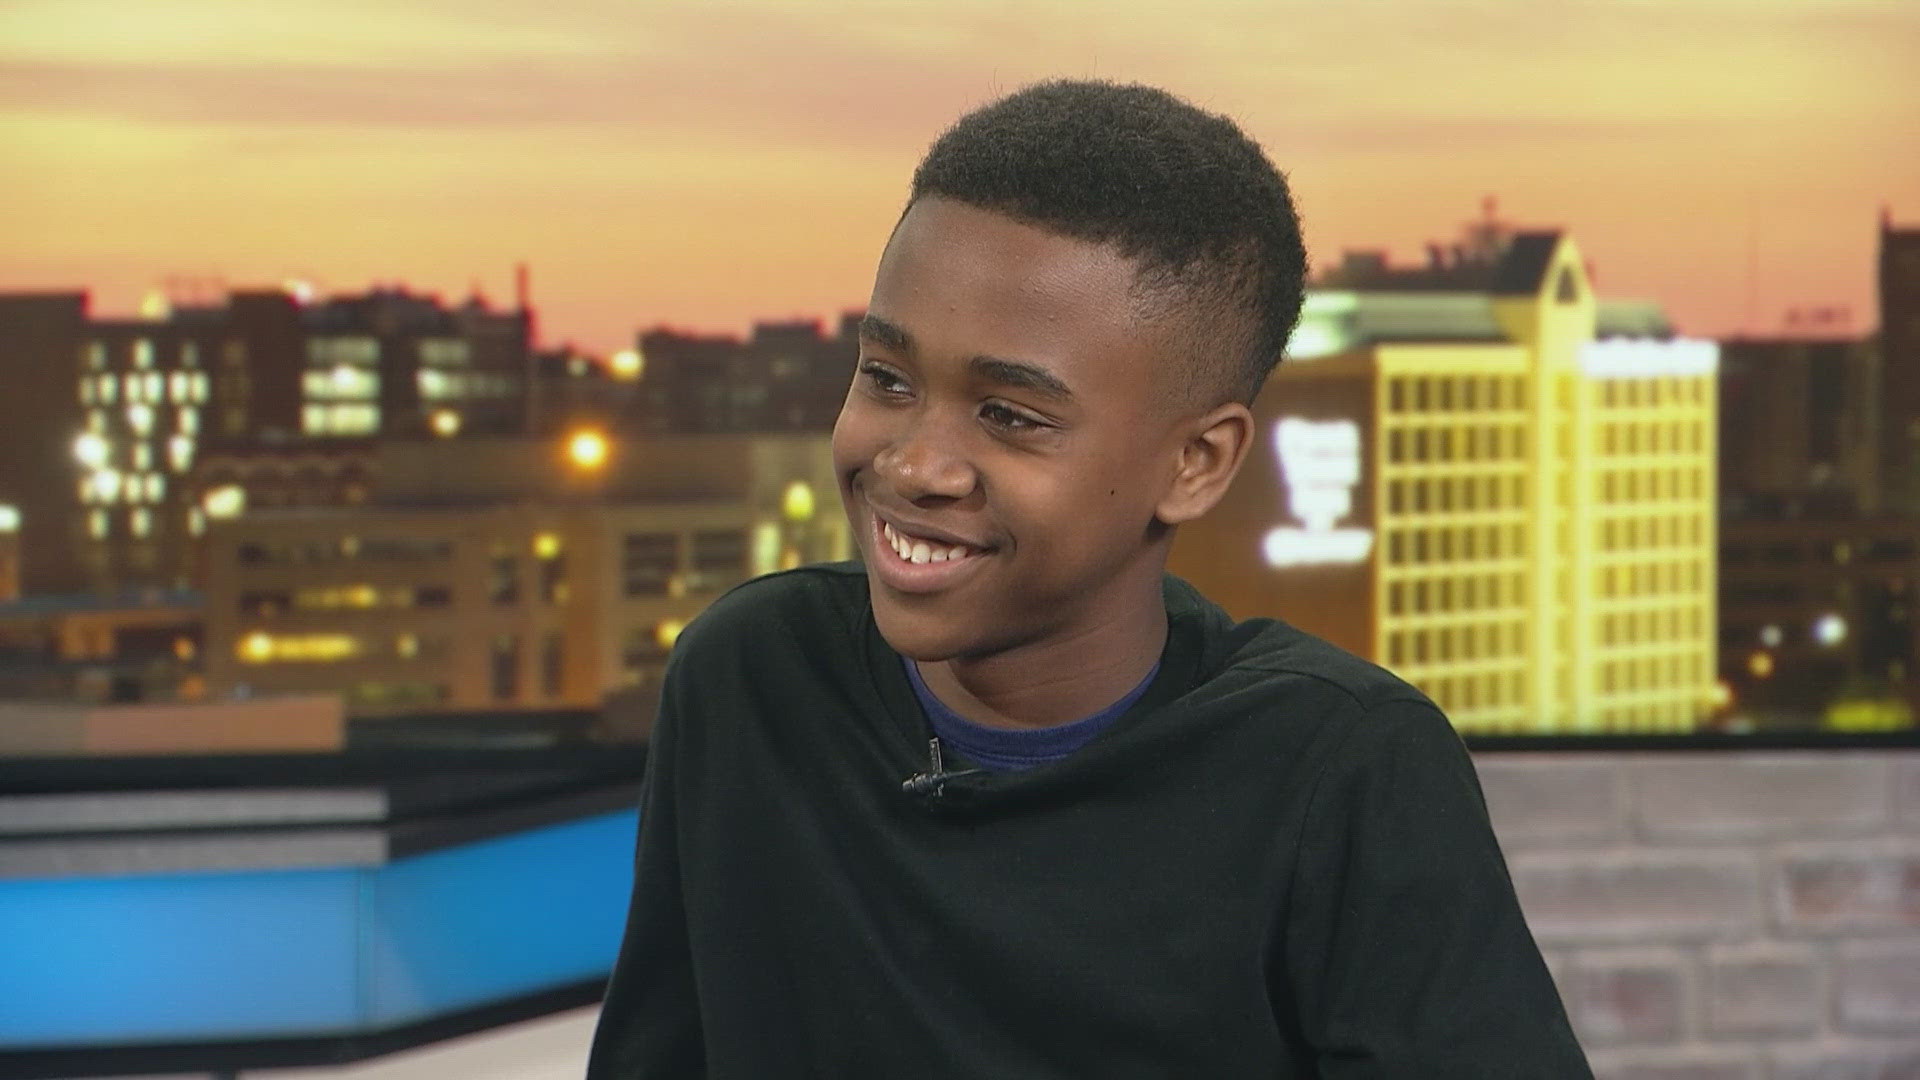 The young actor stopped by Today in St. Louis Weekend Edition to share about his new role and acting career.